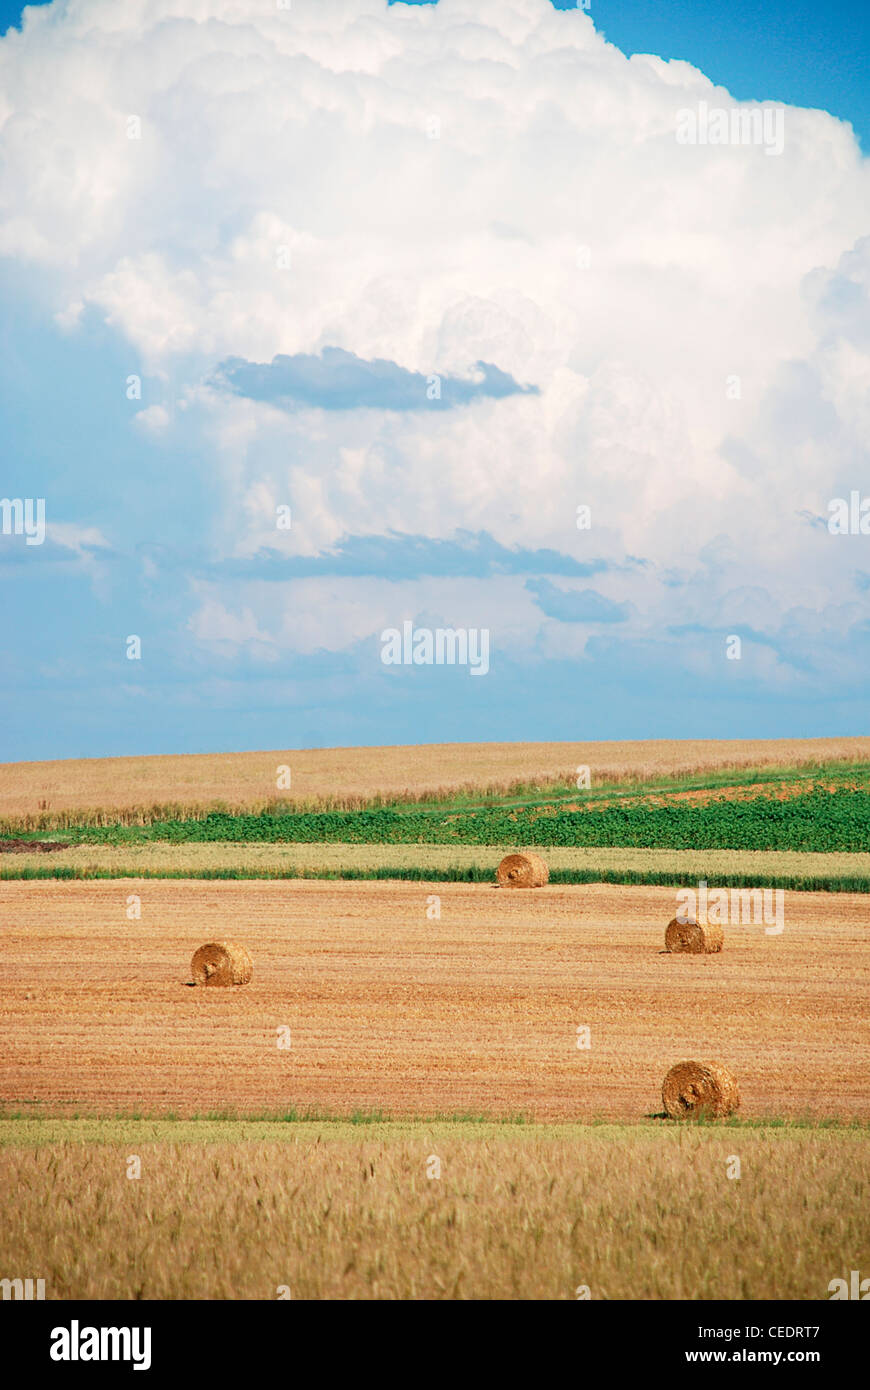 France, Burgundy, Cote d'Or, bales of hay in field Stock Photo